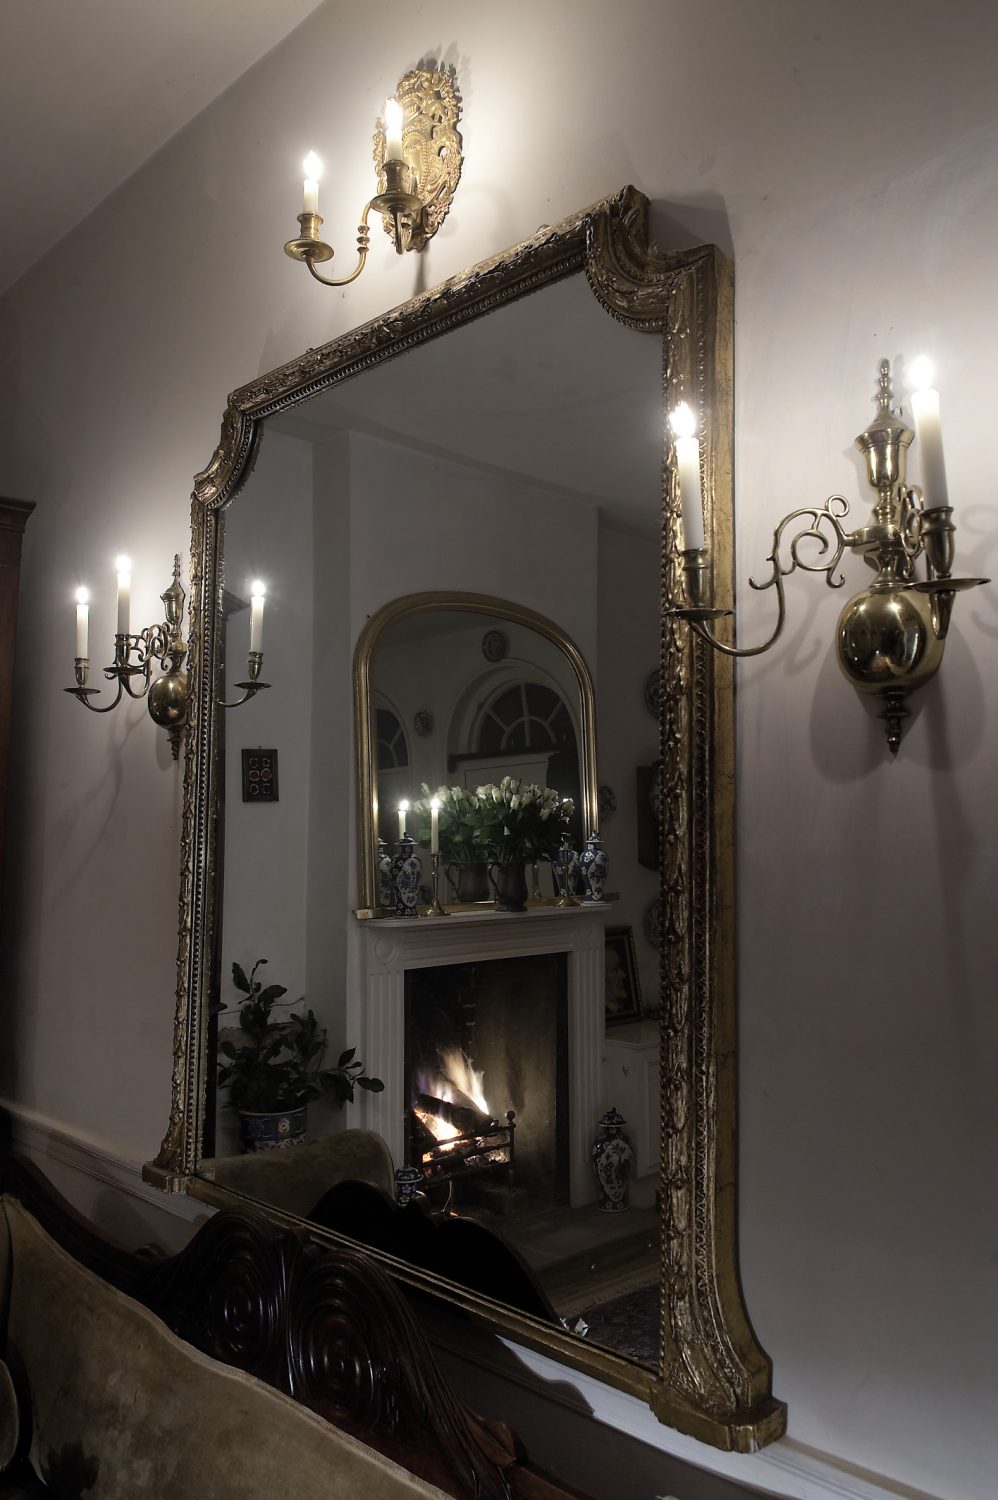 Mirrors throughout the house magnify the sense of space